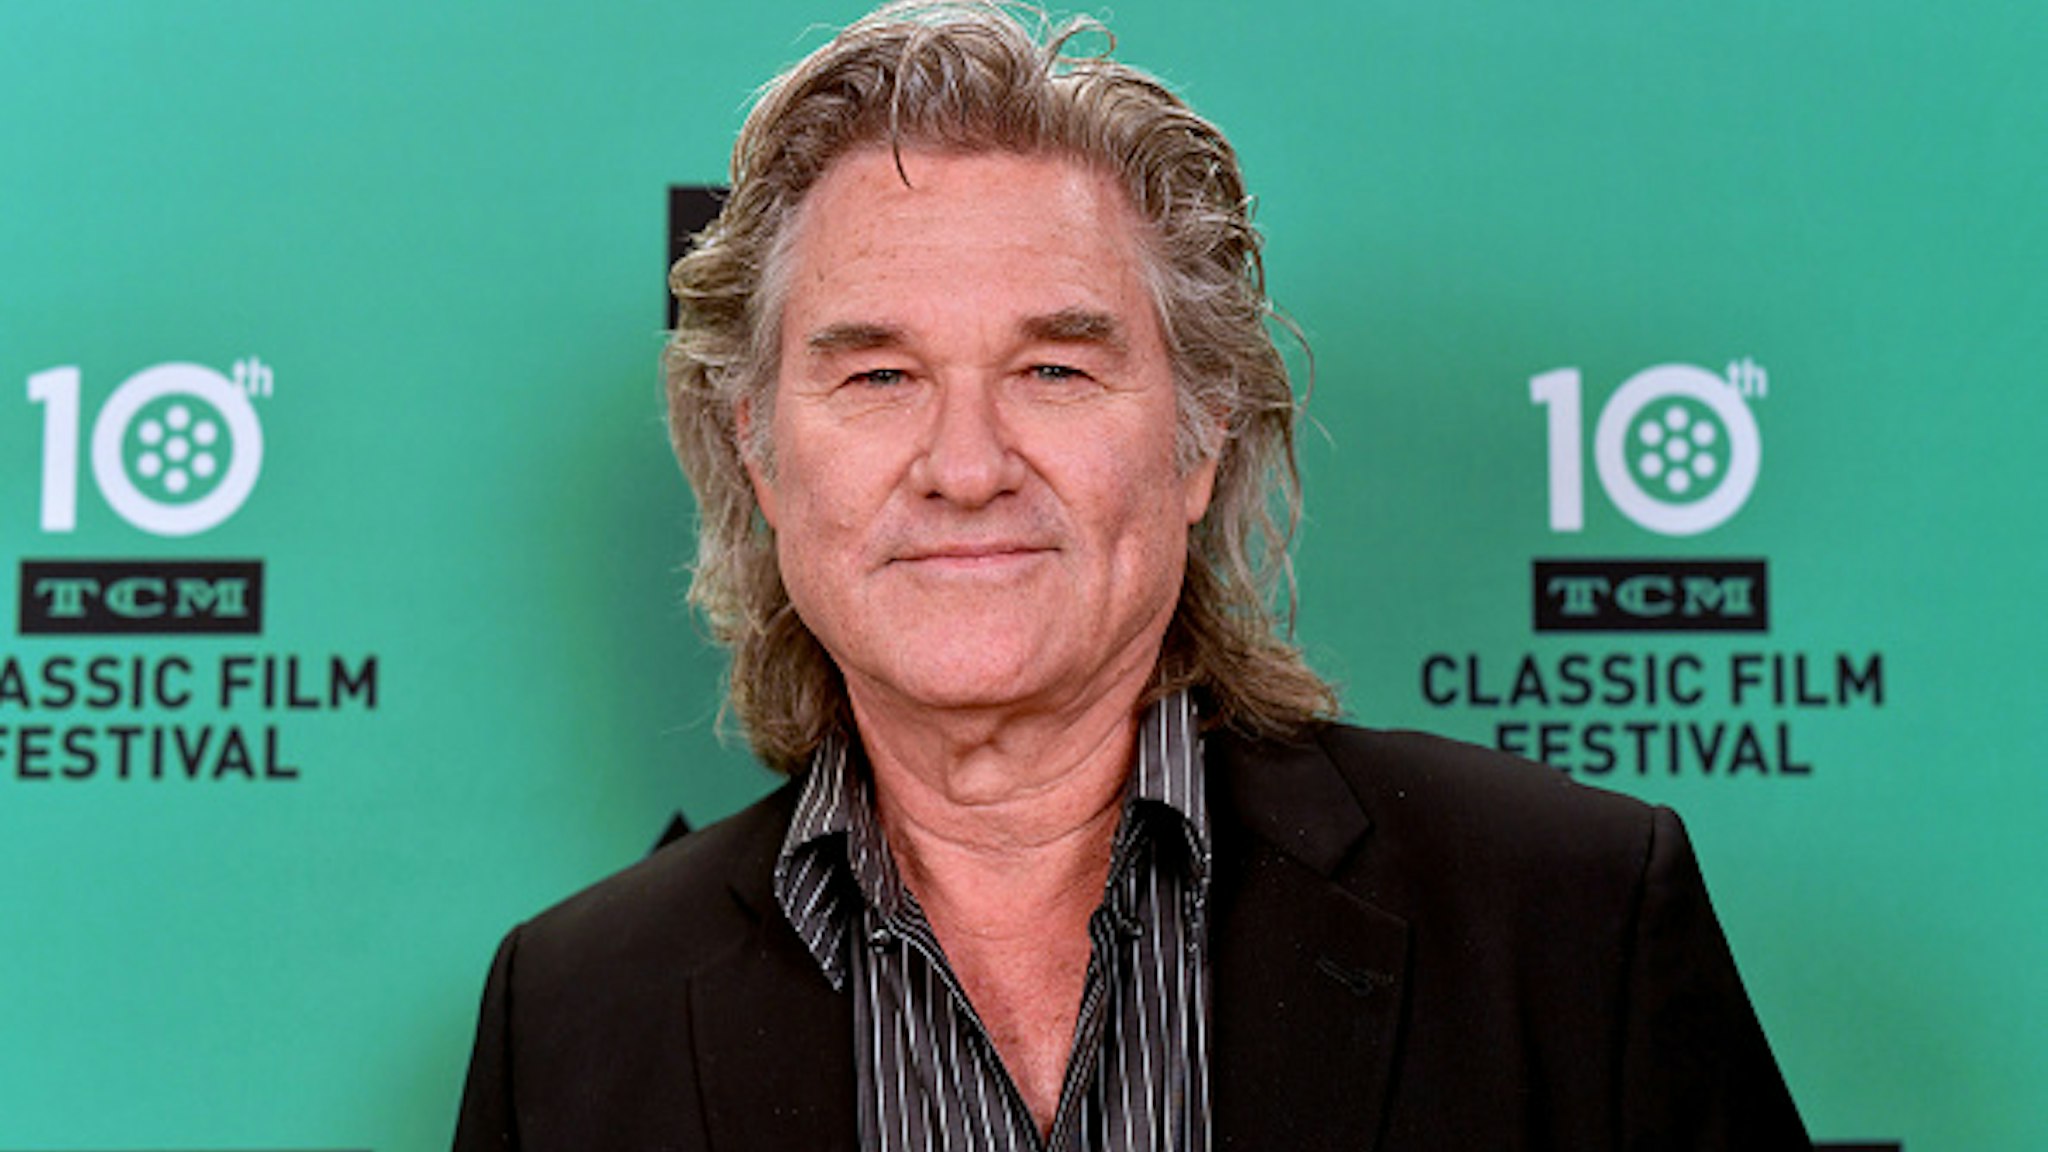 HOLLYWOOD, CALIFORNIA - APRIL 13: Special Guest Kurt Russell attends the screening of 'Escape from New York' at the 2019 TCM 10th Annual Classic Film Festival on April 13, 2019 in Hollywood, California.